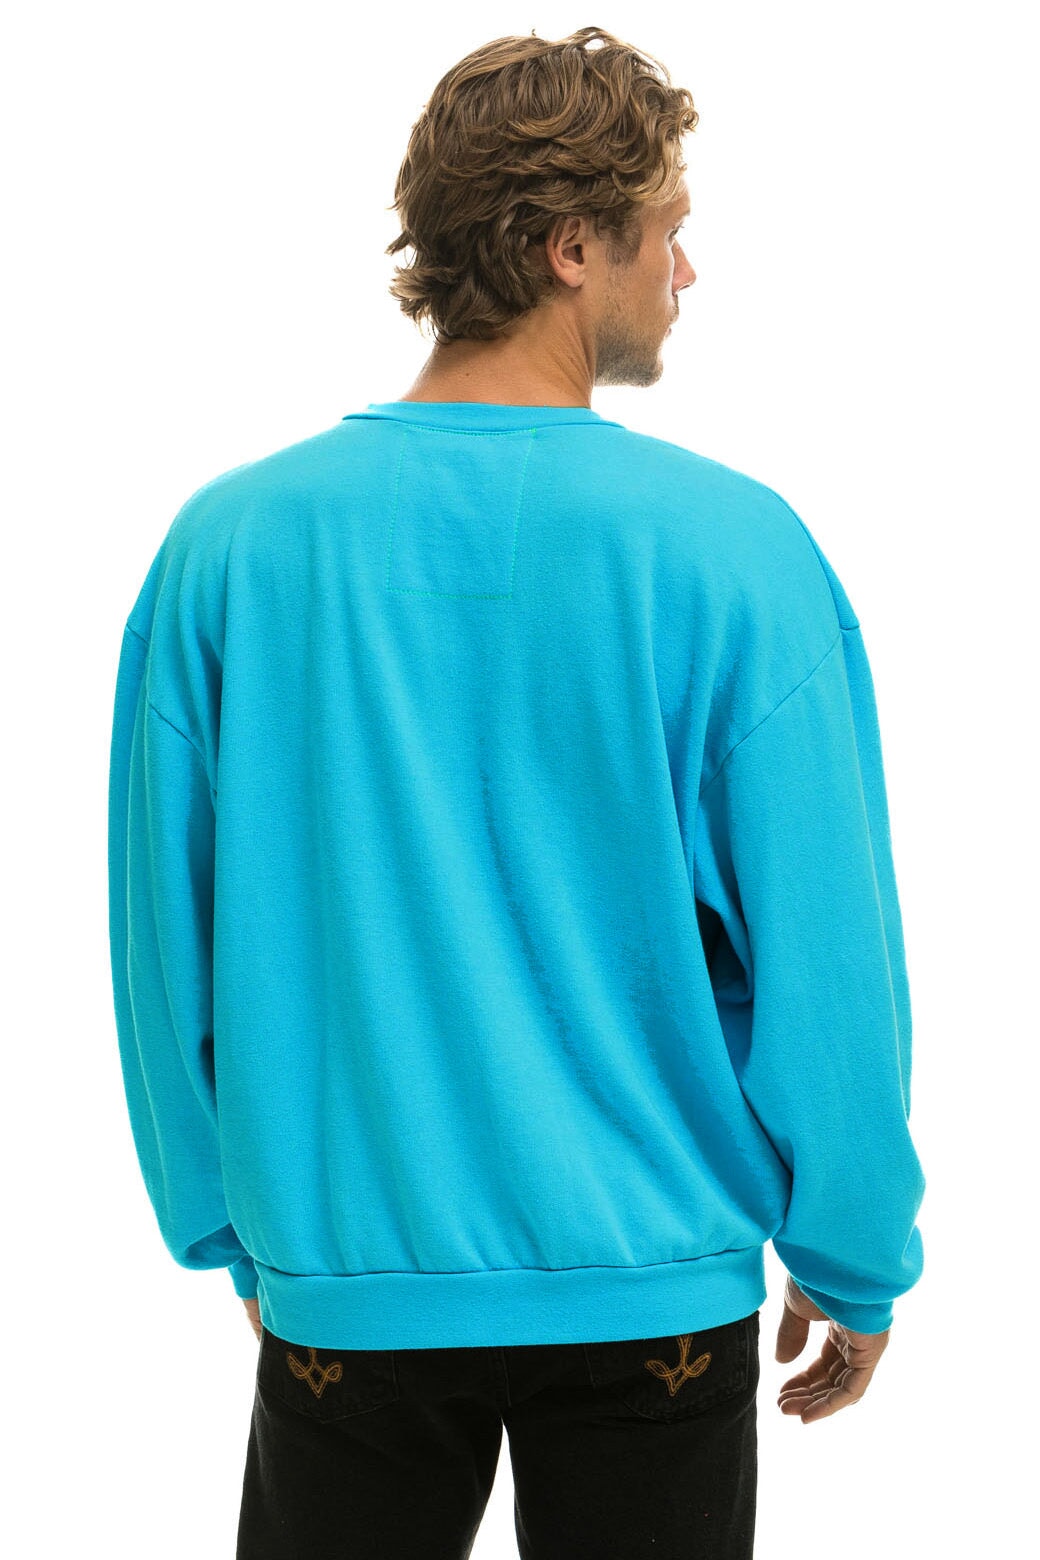 AVIATOR NATION + AIM YOUTH MENTAL HEALTH RELAXED SWEATSHIRT - NEON BLUE Sweatshirt Aviator Nation 